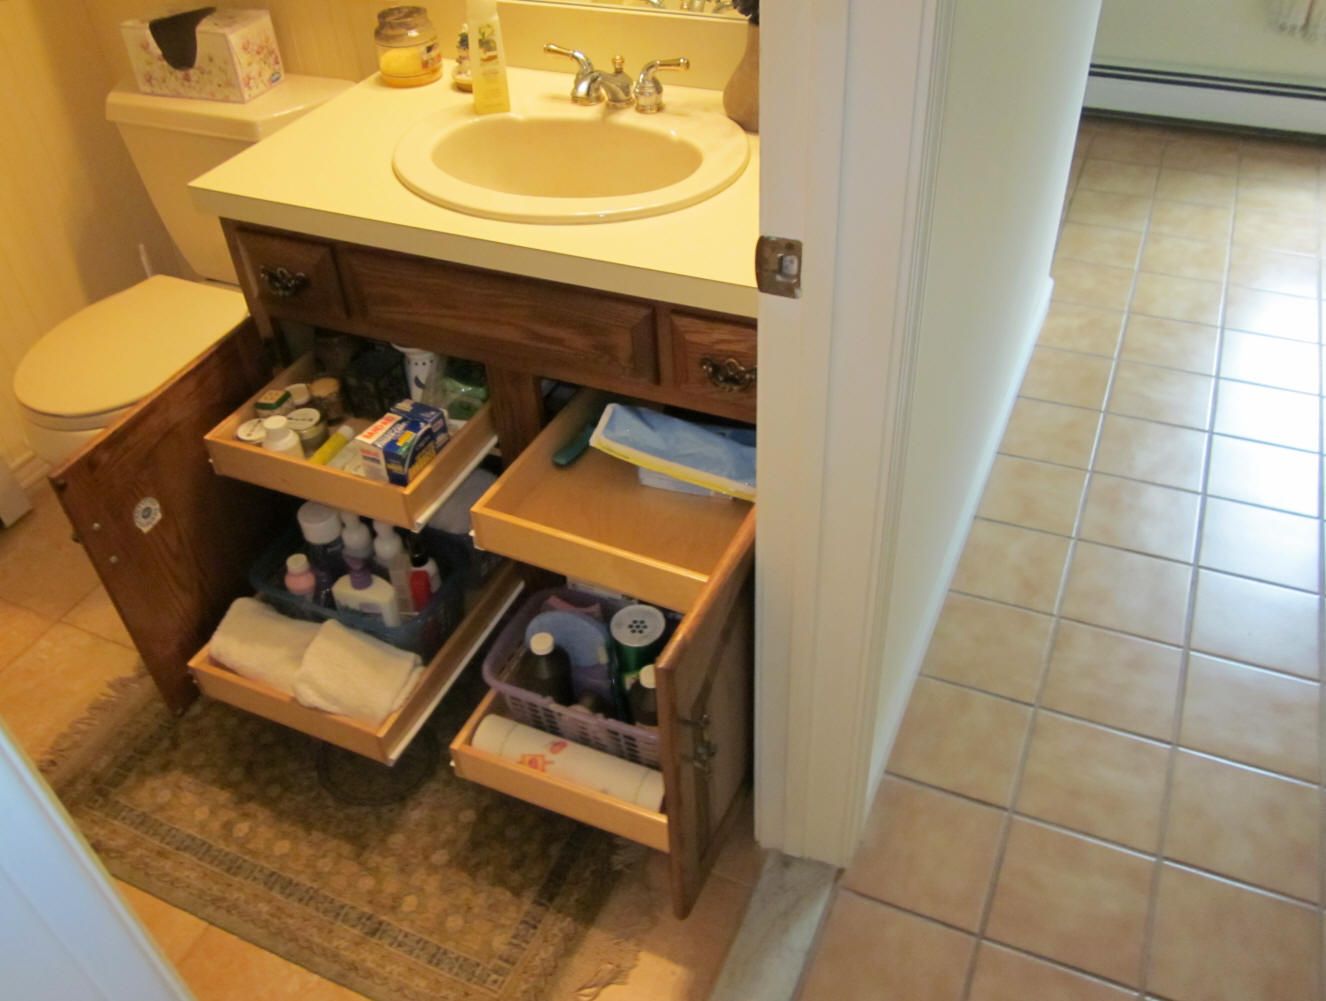 What Not To Store In A Bathroom Cabinet, According To Experts